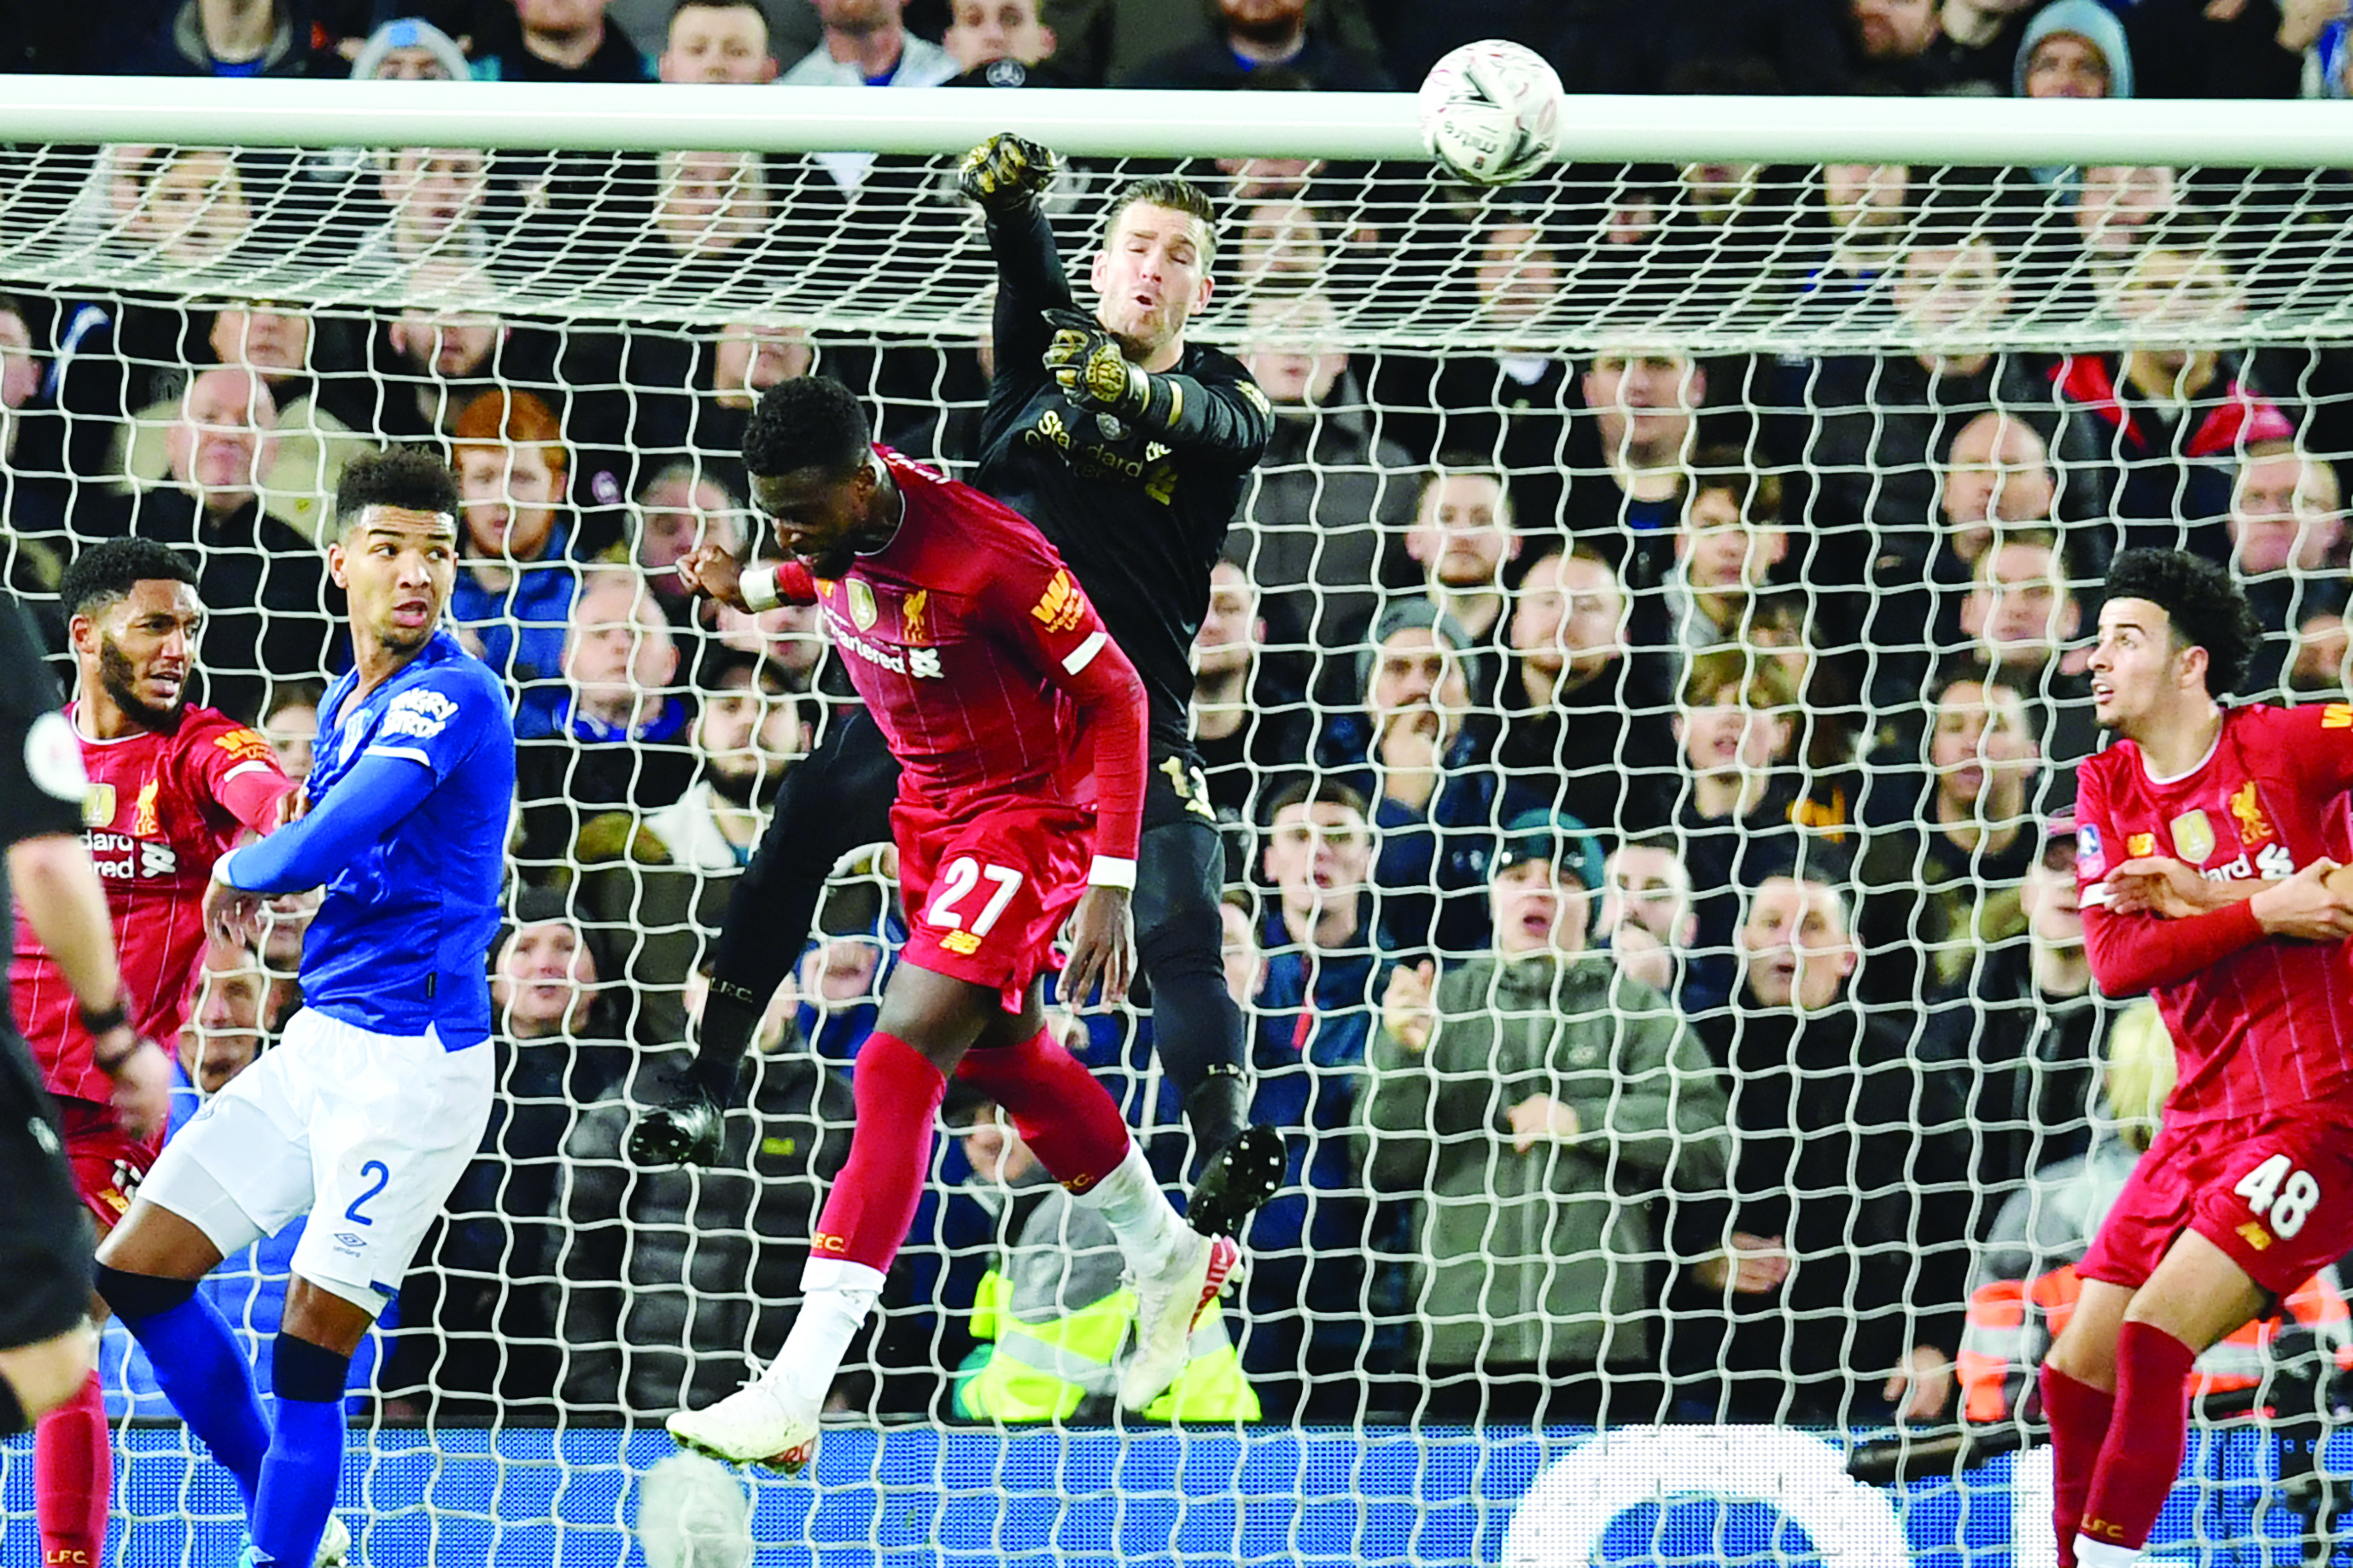 Liverpool's Spanish goalkeeper Adrian (C) punches the ball clear during the English FA Cup third round football match between Liverpool and Everton at Anfield in Liverpool, north west England on January 5, 2020. (Photo by Paul ELLIS / AFP) / RESTRICTED TO EDITORIAL USE. No use with unauthorized audio, video, data, fixture lists, club/league logos or 'live' services. Online in-match use limited to 120 images. An additional 40 images may be used in extra time. No video emulation. Social media in-match use limited to 120 images. An additional 40 images may be used in extra time. No use in betting publications, games or single club/league/player publications. /